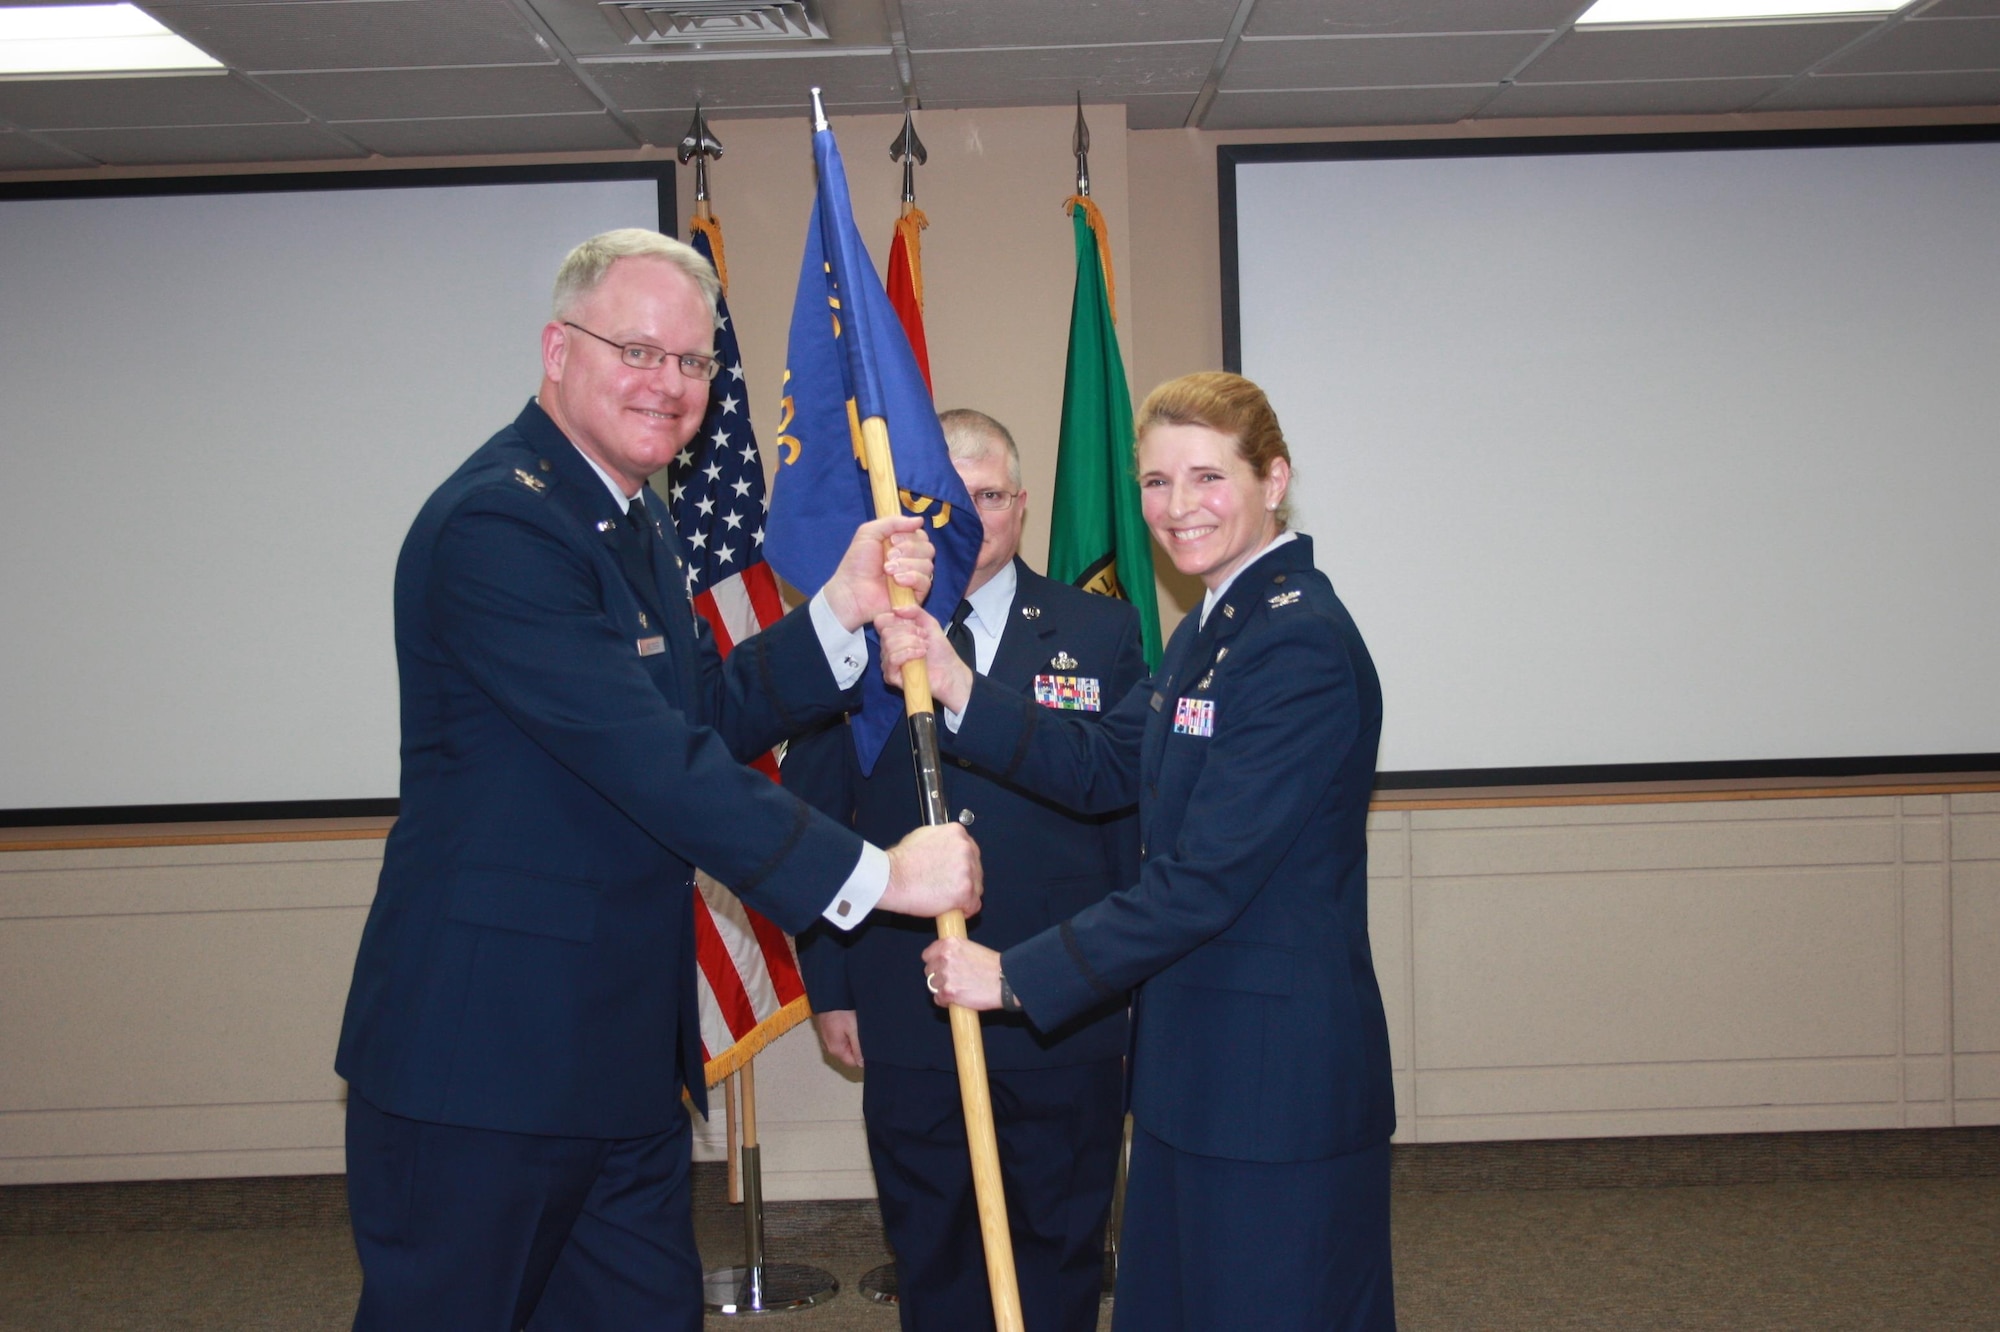 Col. William Krueger, 225th Air Defense Group commander, hands off the guidon to Col. Paige Abbott, 225th Support Squadron commander, during the 225th Support Squadron change of command at the Western Air Defense Sector on Joint Base Lewis-McChord, Wash., Jan. 29, 2016. The 225th Support Squadron is a subordinate unit of the 225th Air Defense Group, which conducts the Western Air Defense Sector's (WADS) mission. WADS is responsible for air sovereignty and counter-air operations over the western United States and directs a variety of assets to defend 2.2 million square miles of land and sea. (U.S. Air National Guard photo by 1st Lt. Colette Muller/Released)